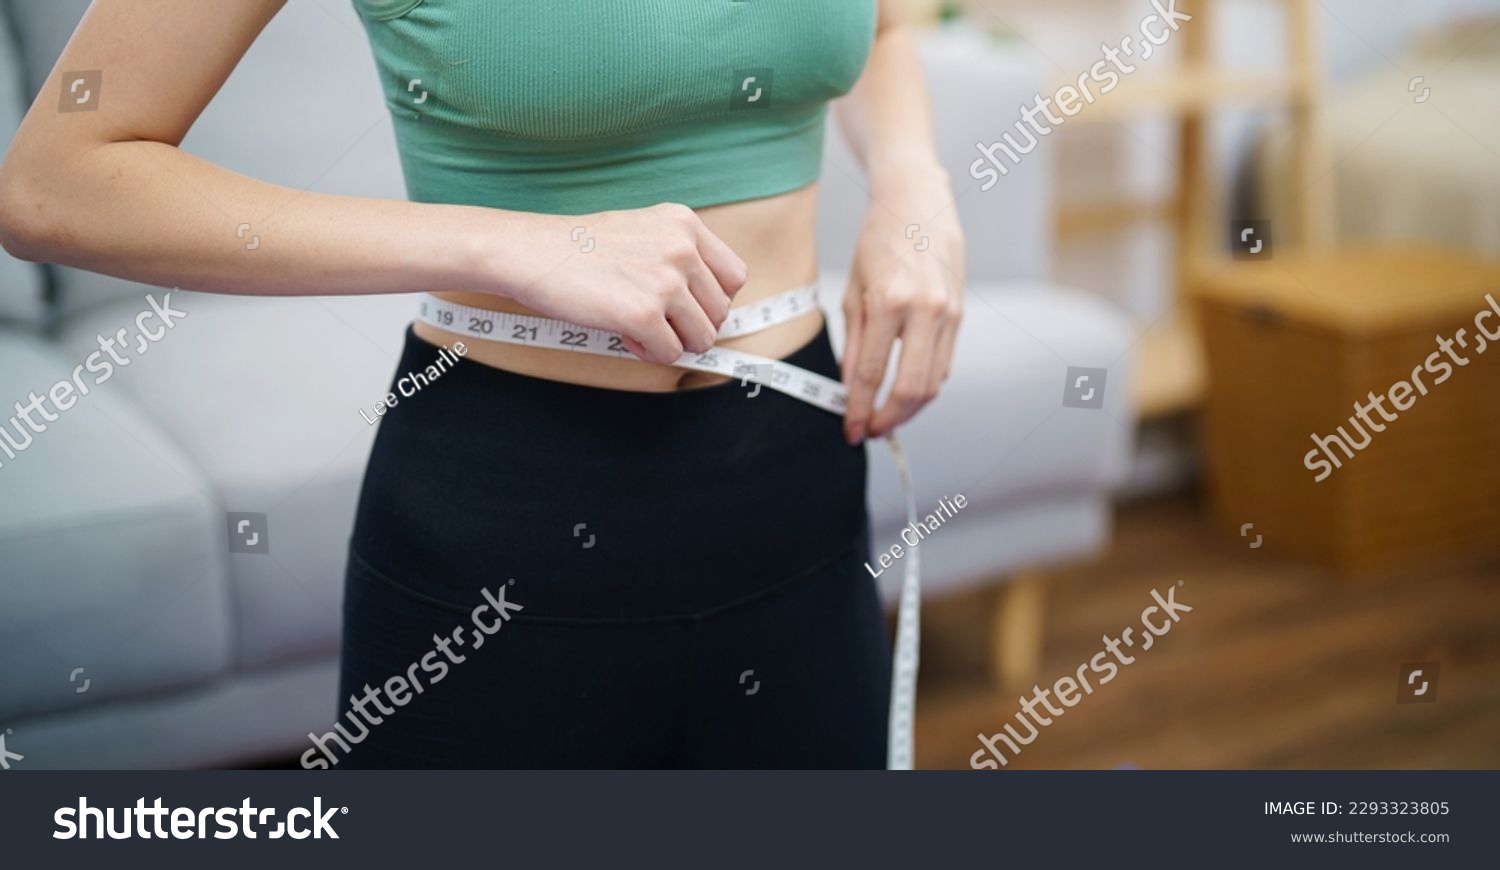 Asian woman with anorexia  with measuring tape feeling unhappy. Anorexia problem body perception and dysmorphia conceptใ #2293323805